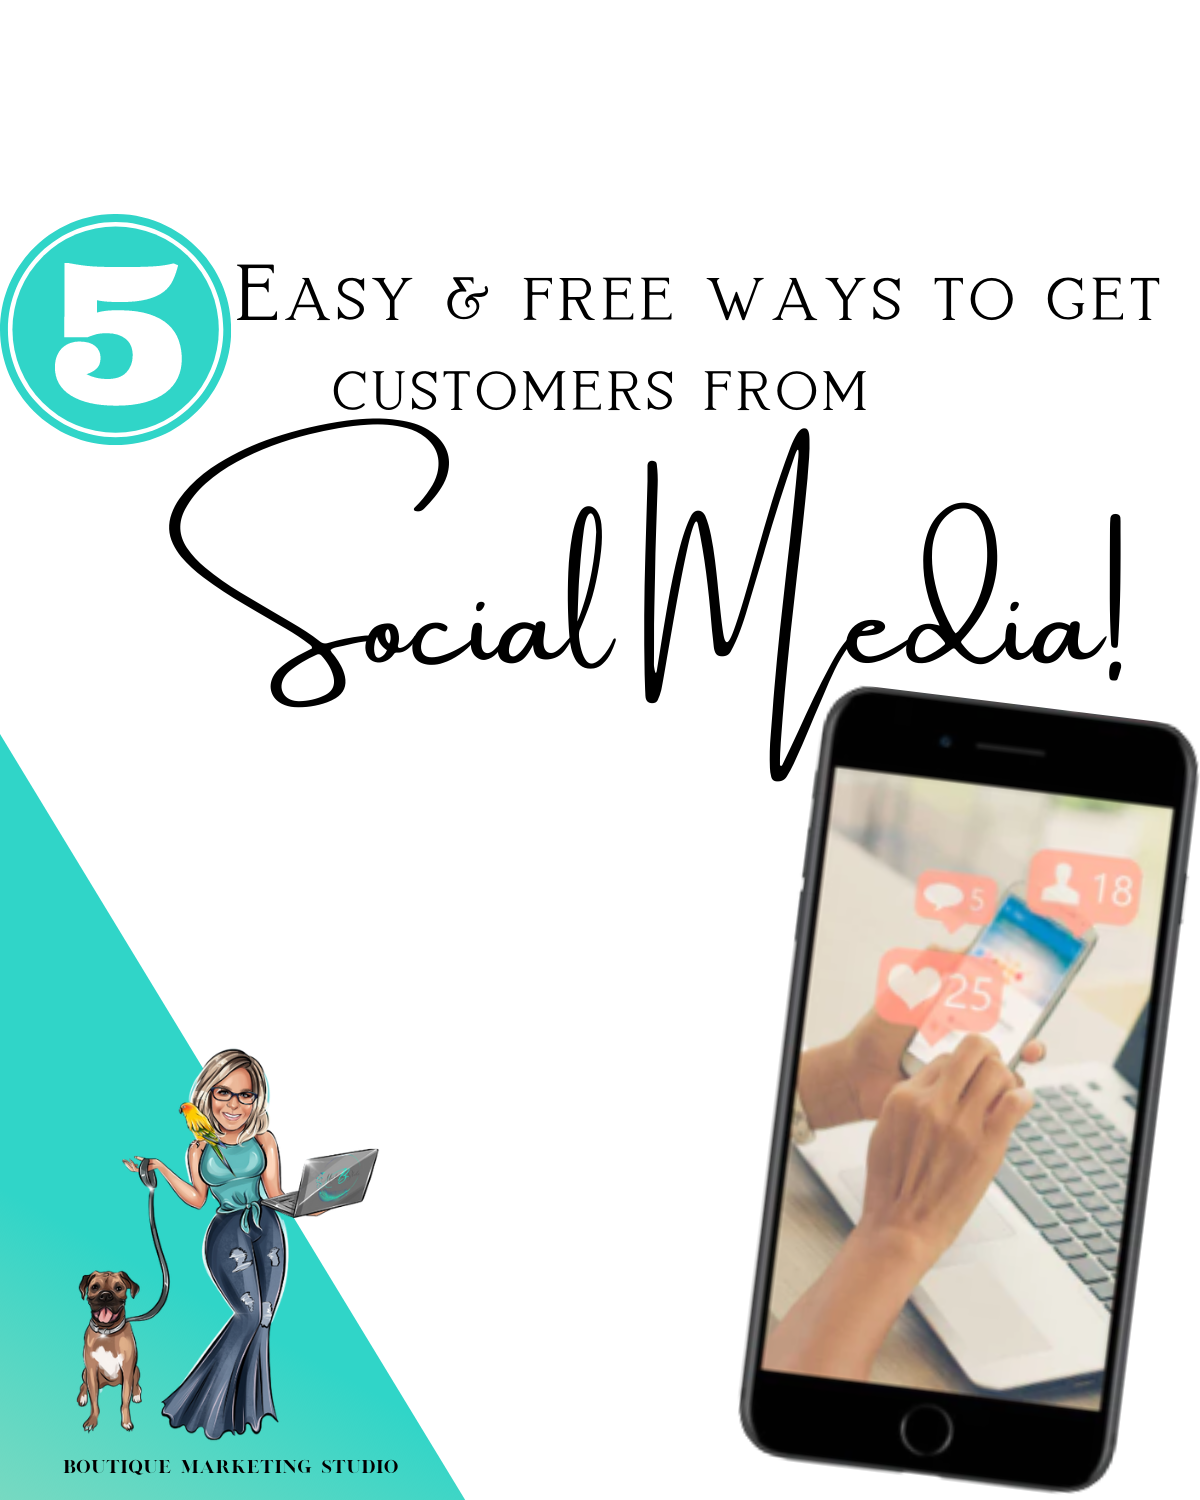 5 Easy & Free ways to get customers from Social Media!